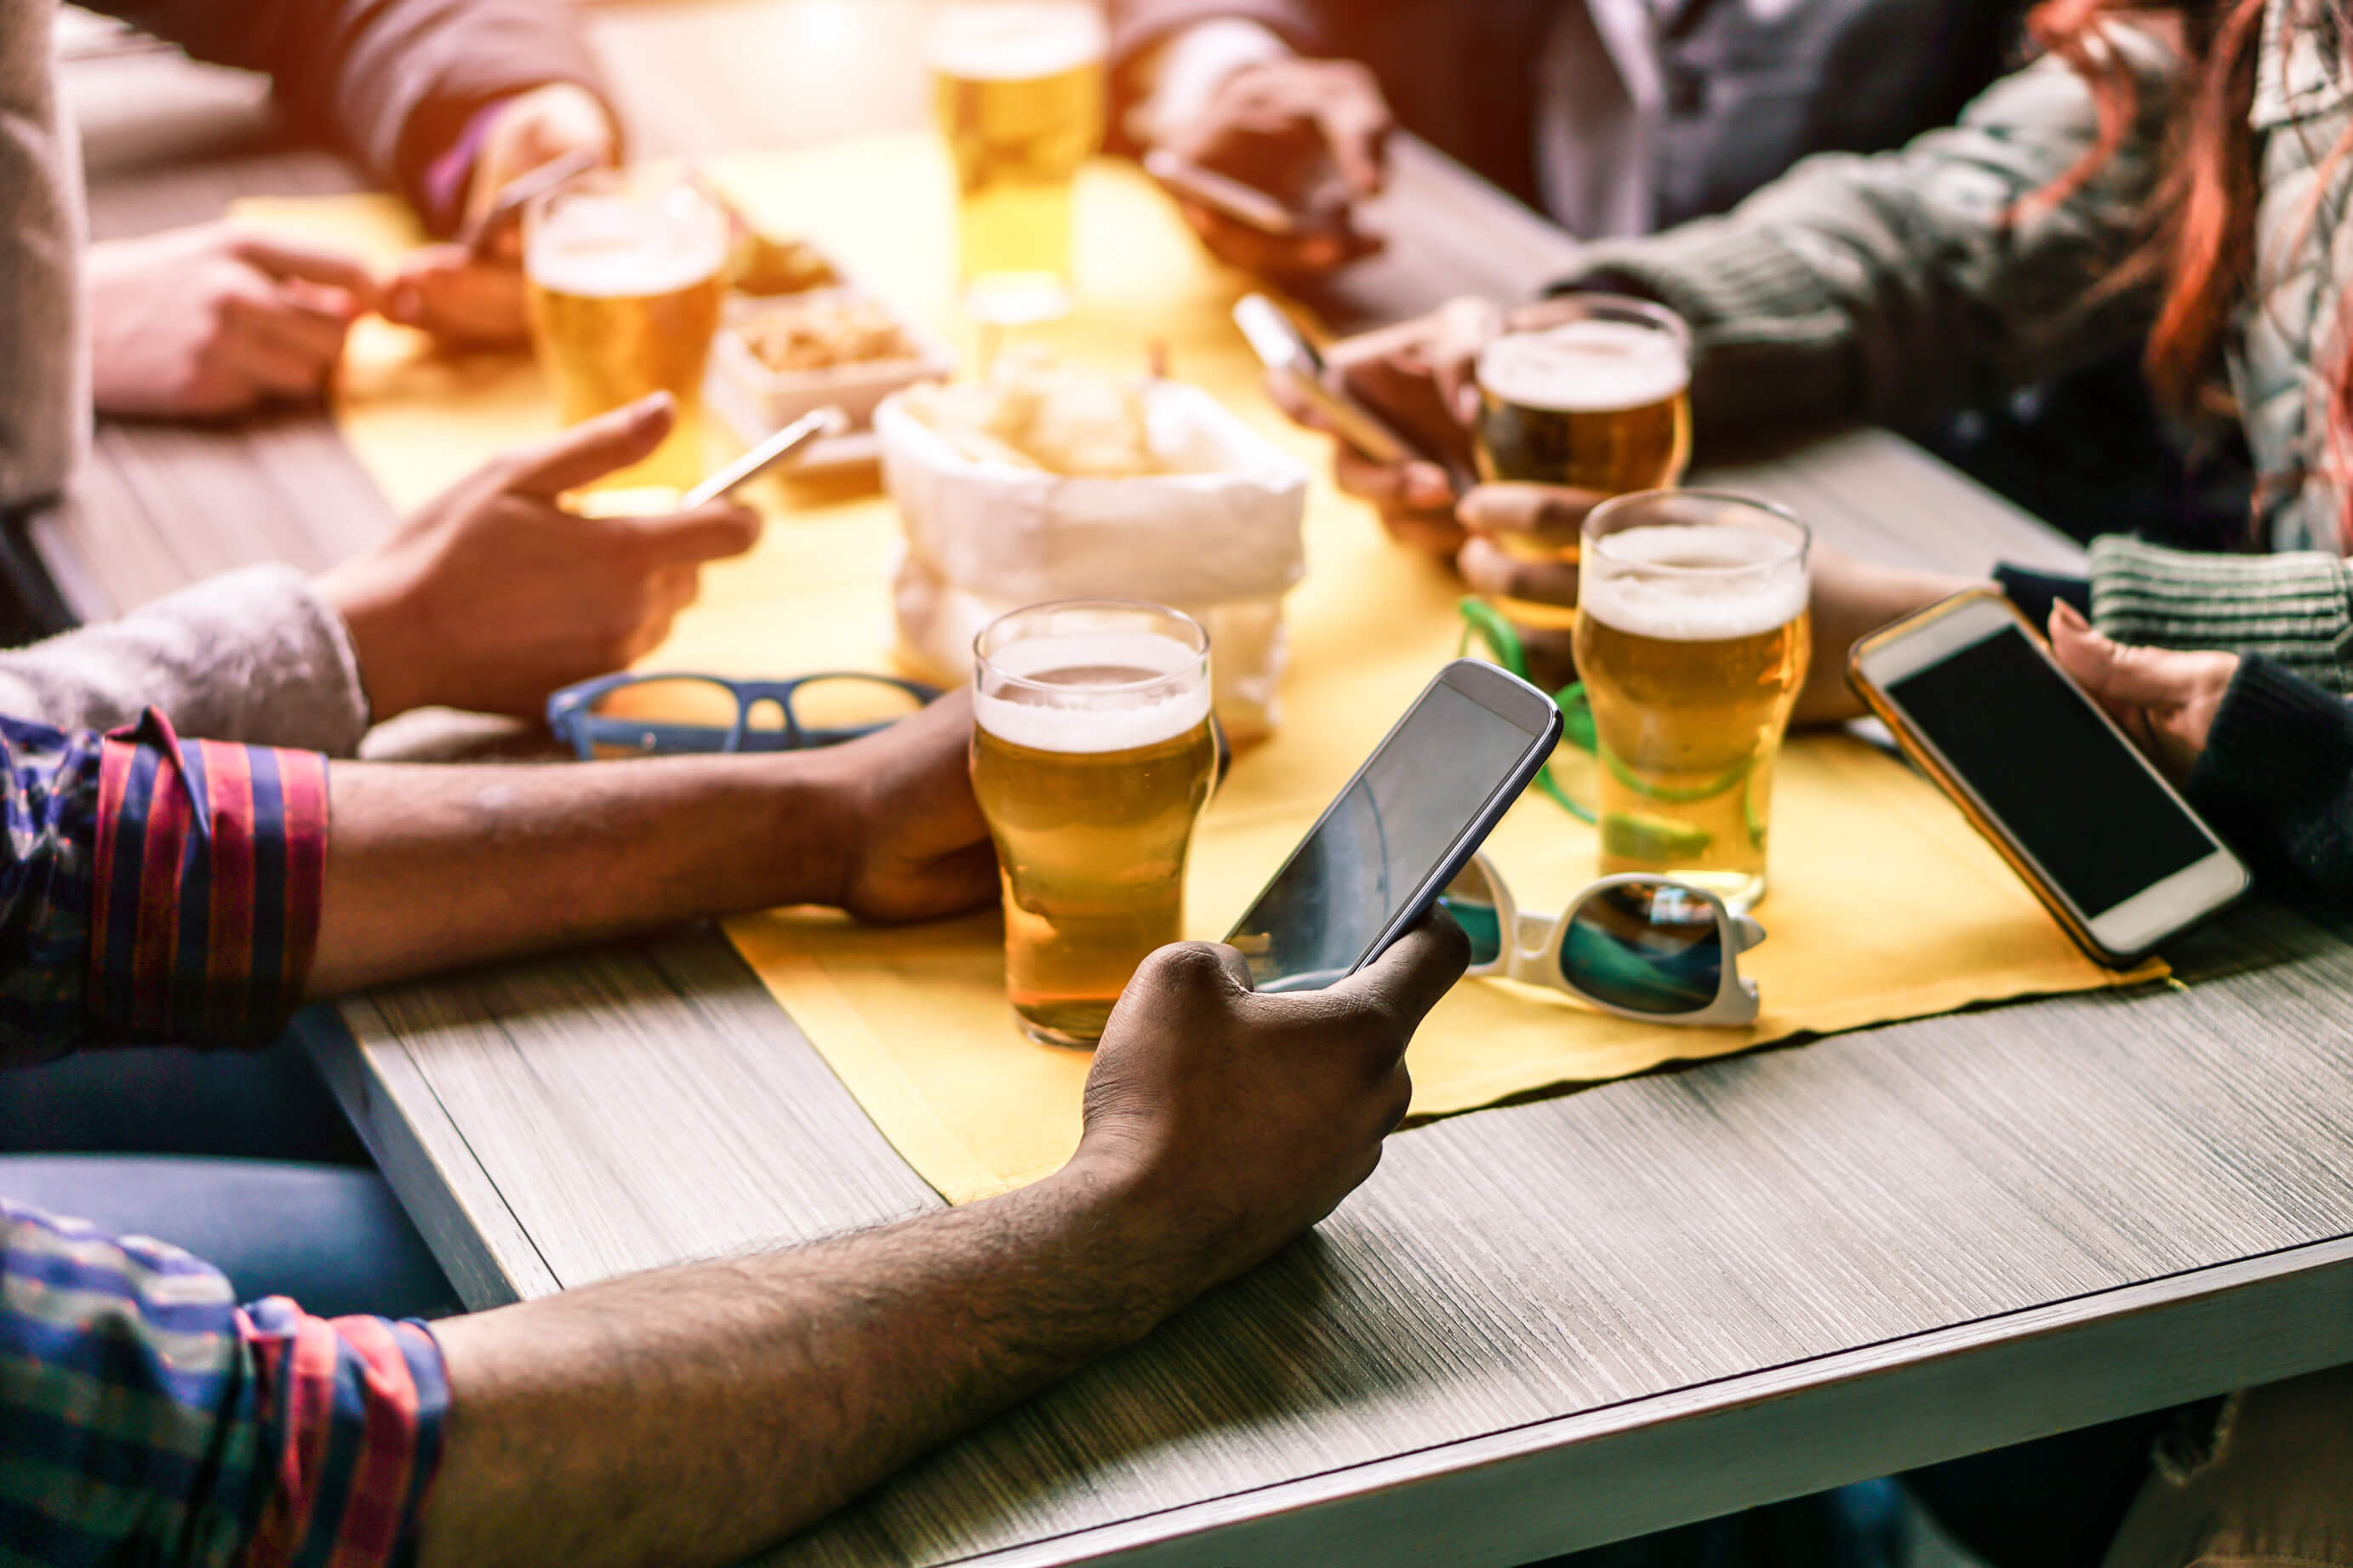 Group of people at a restaurant with food and beer on their phones